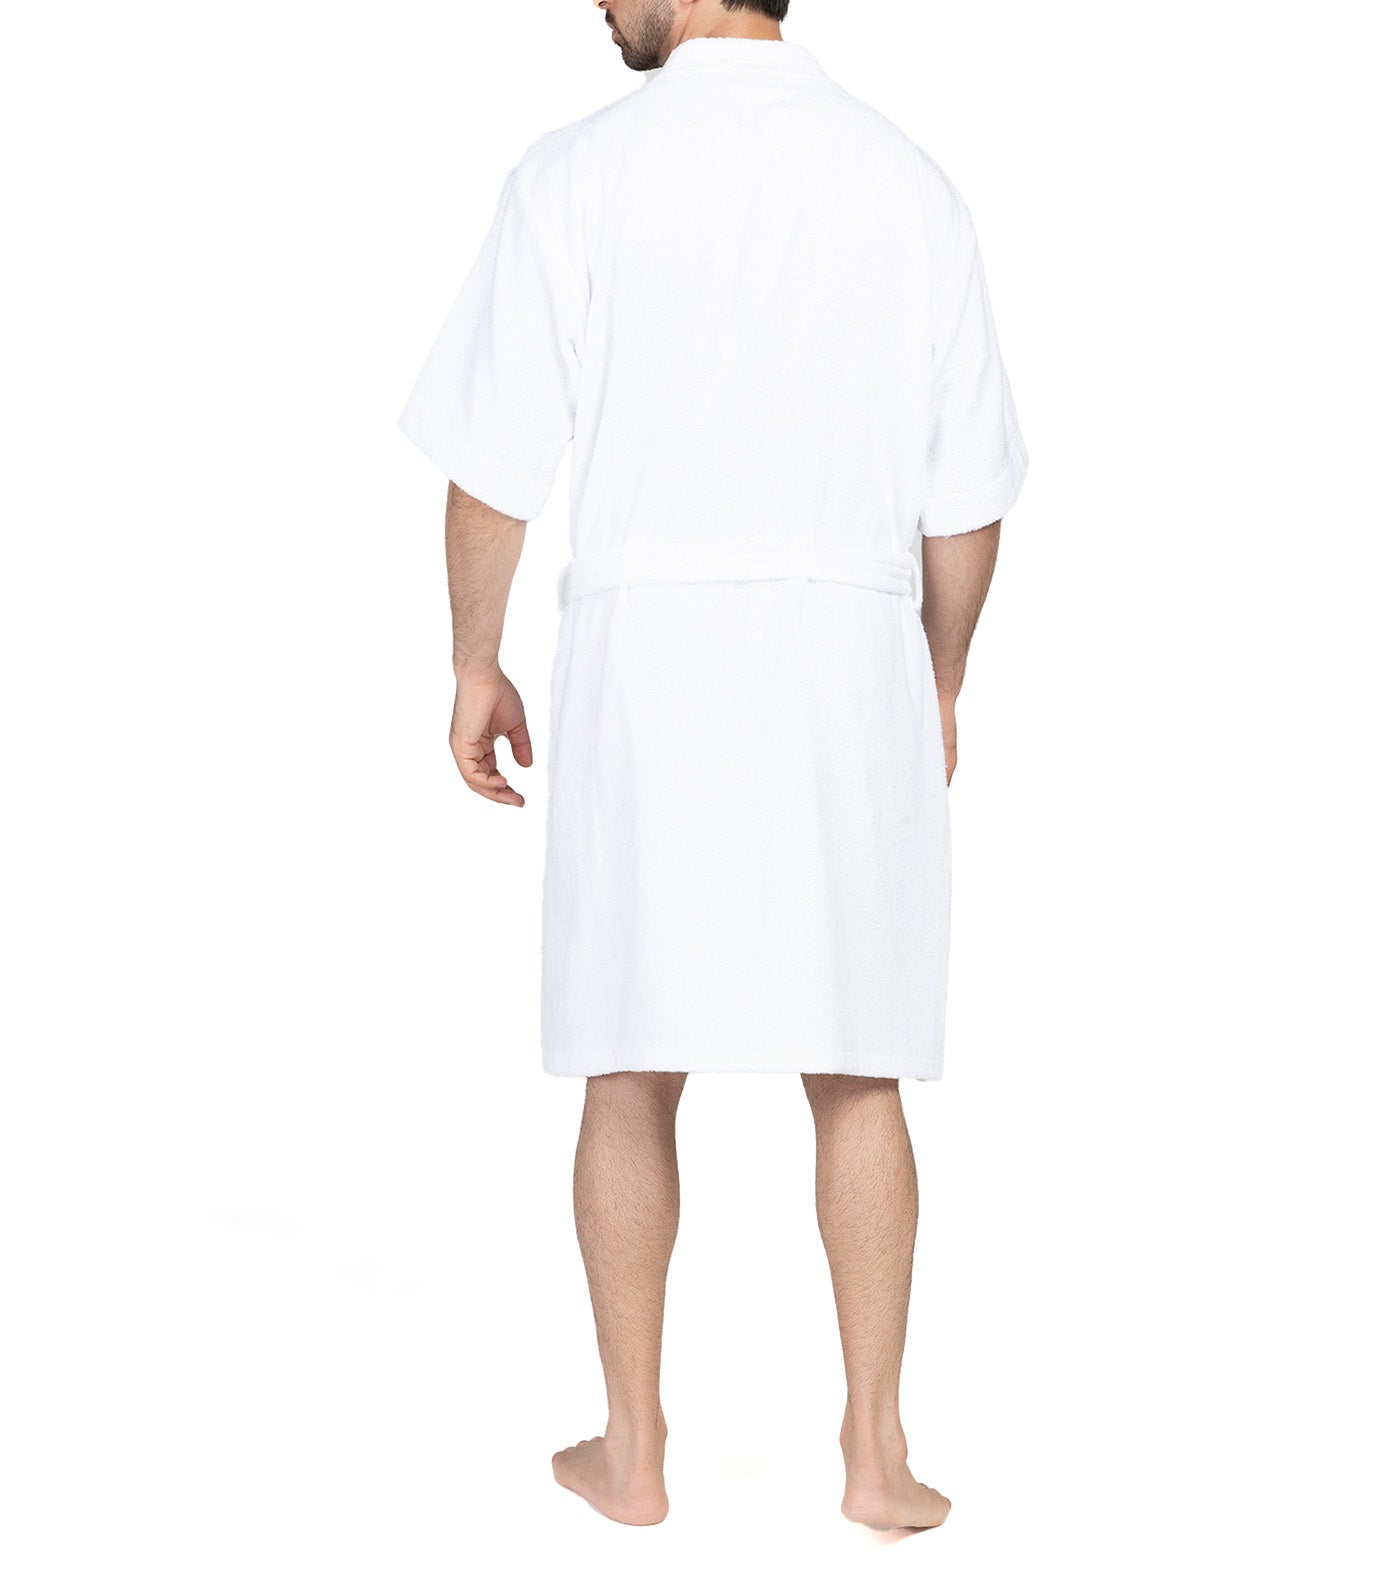 Terry Robe for Male - White